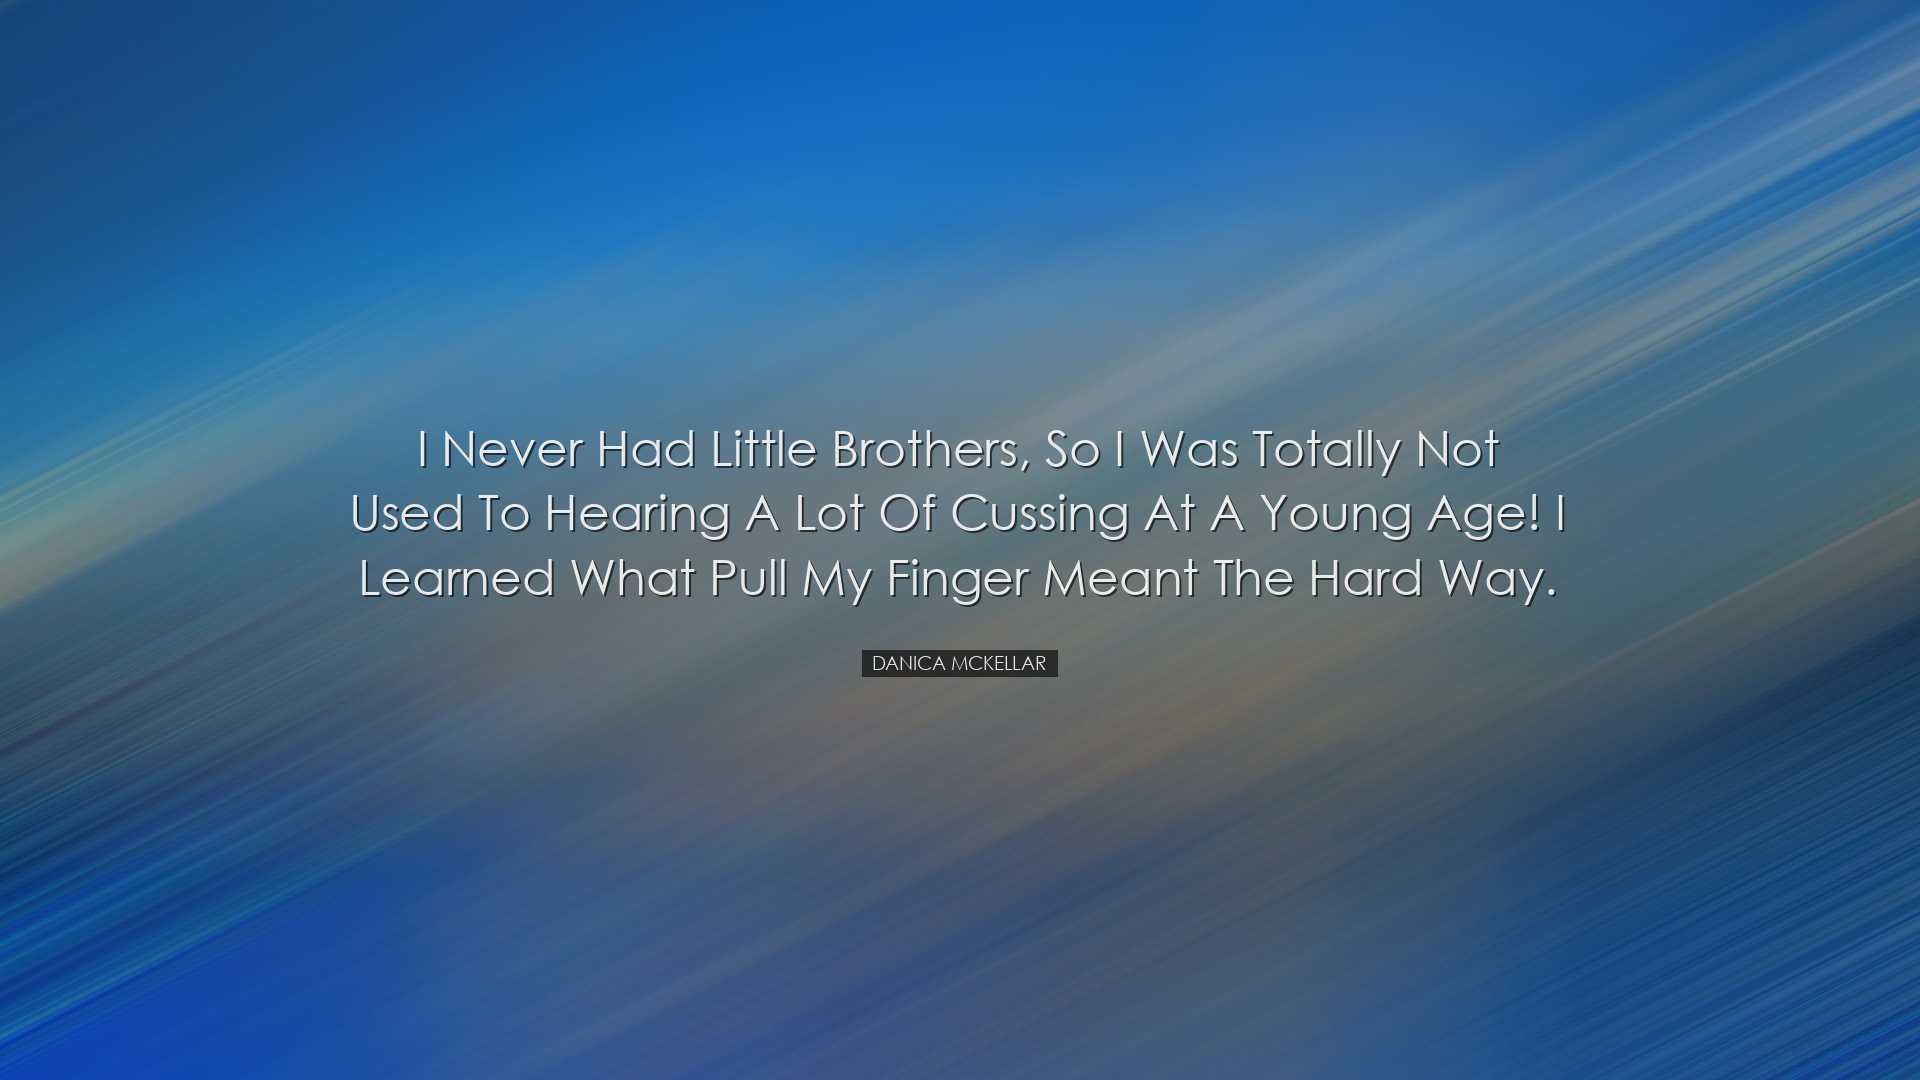 I never had little brothers, so I was totally not used to hearing